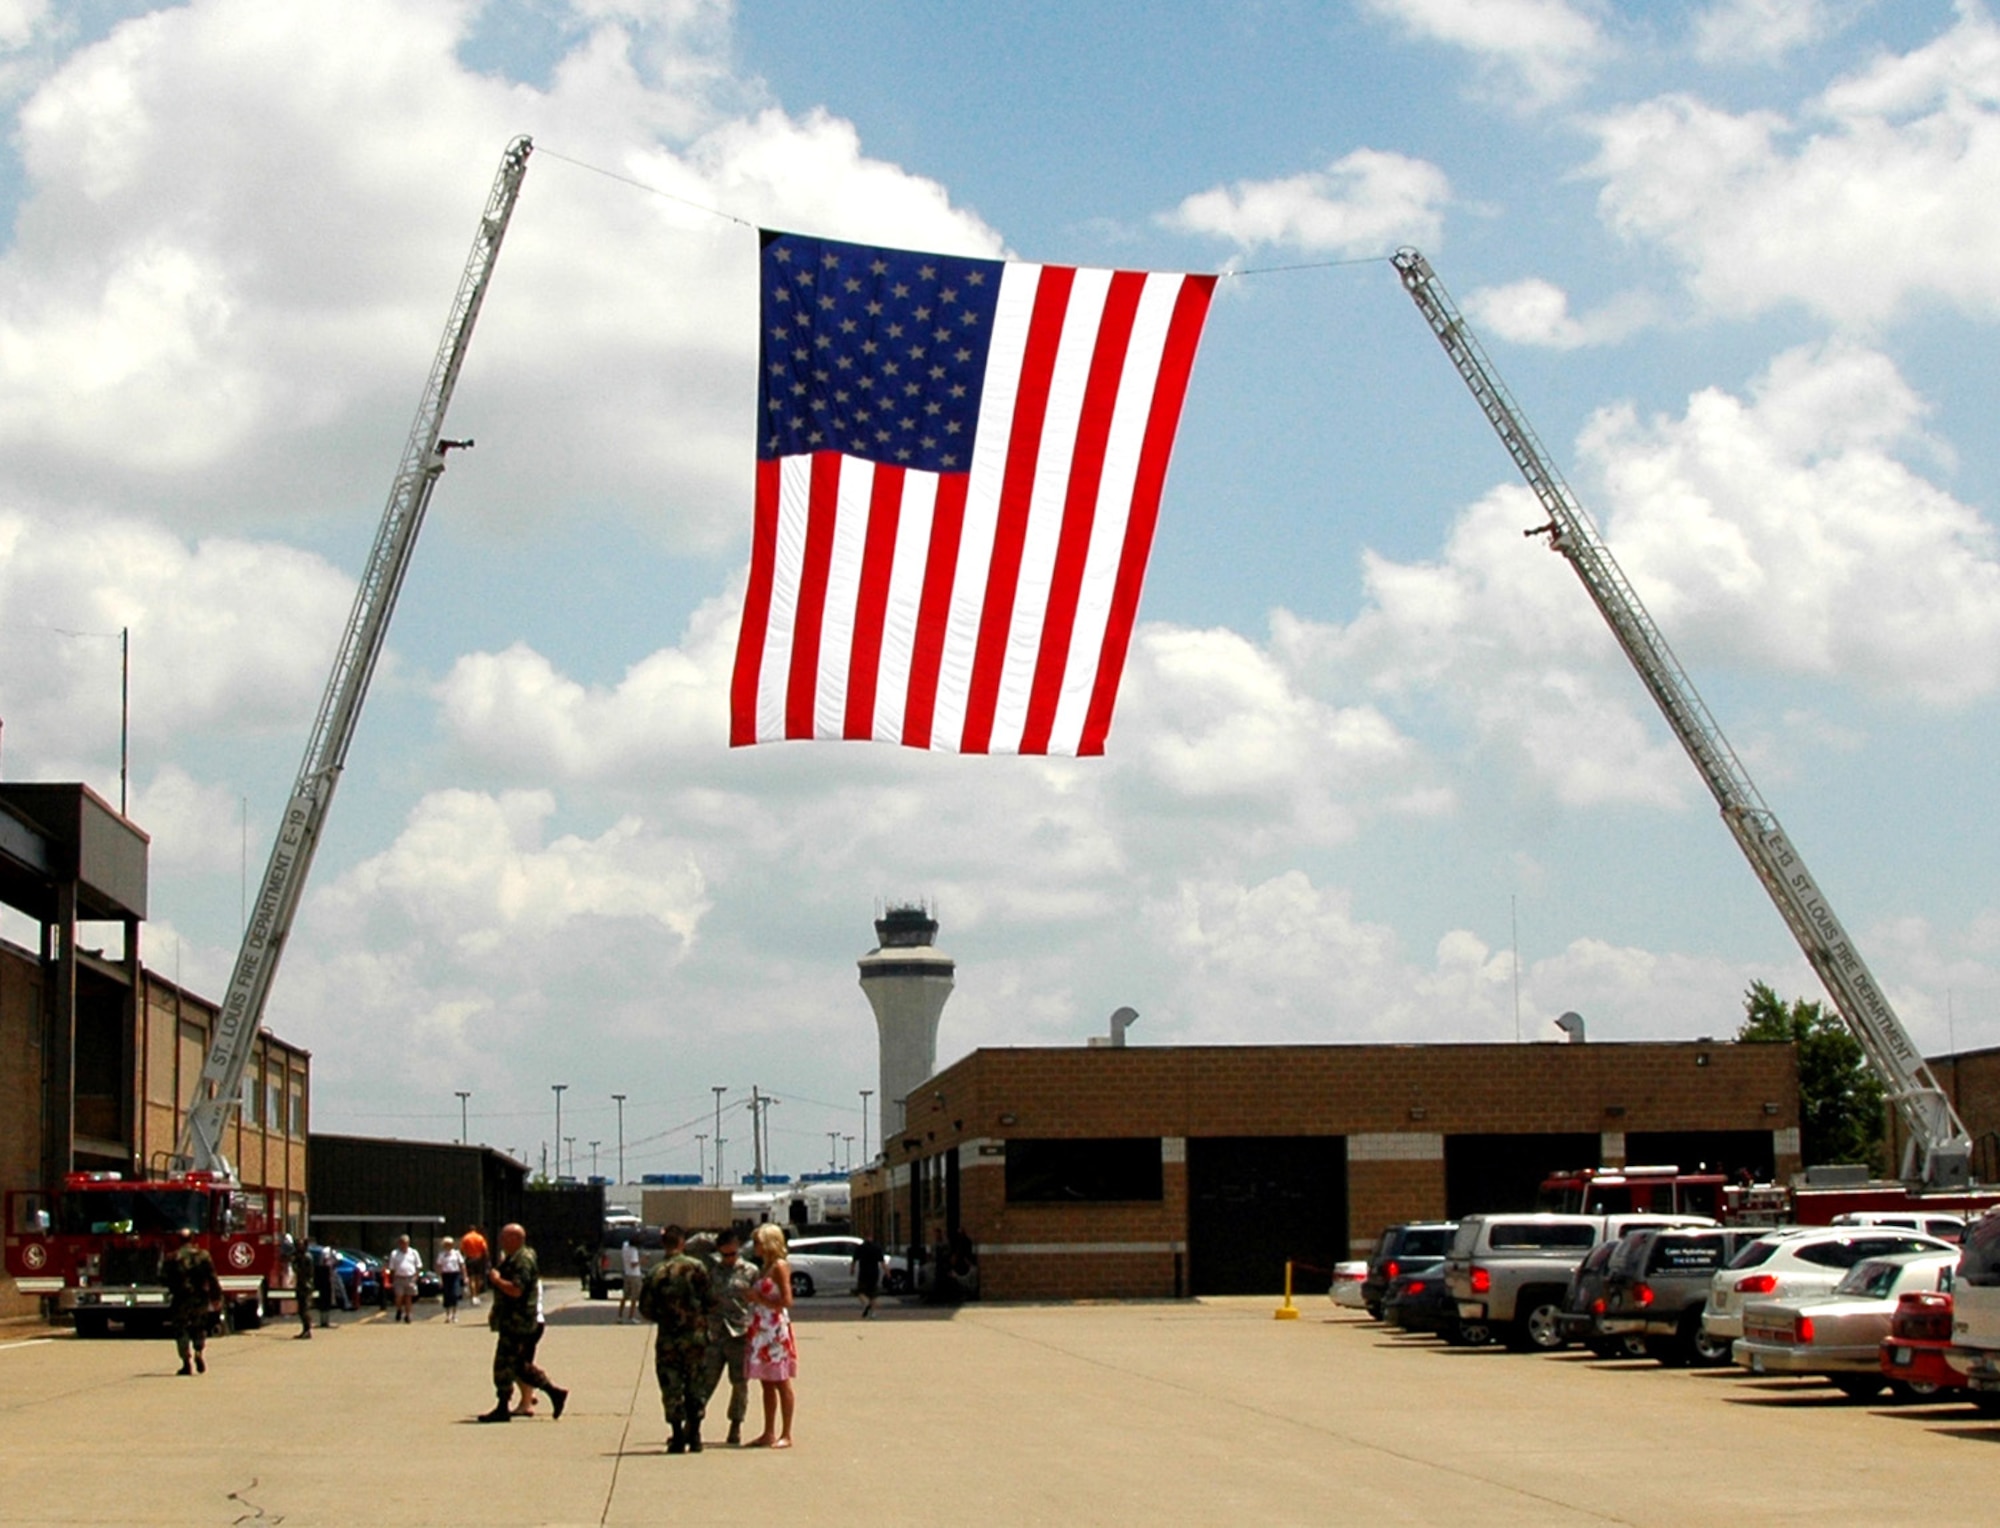 ST. LOUIS - A flag waves gently in the breeze June 13 at the End of Era ceremony held at the 131st Fighter Wing Missouri Air National Guard Base-Lambert Field. The Saint Louis City Fire Department assisted in the event with a display of the American flag. The ceremony commemorated the culmination of 86 years of flying operations in Saint Louis. (U.S. Air Force Photo/Master Sgt. Mary-Dale Amison)